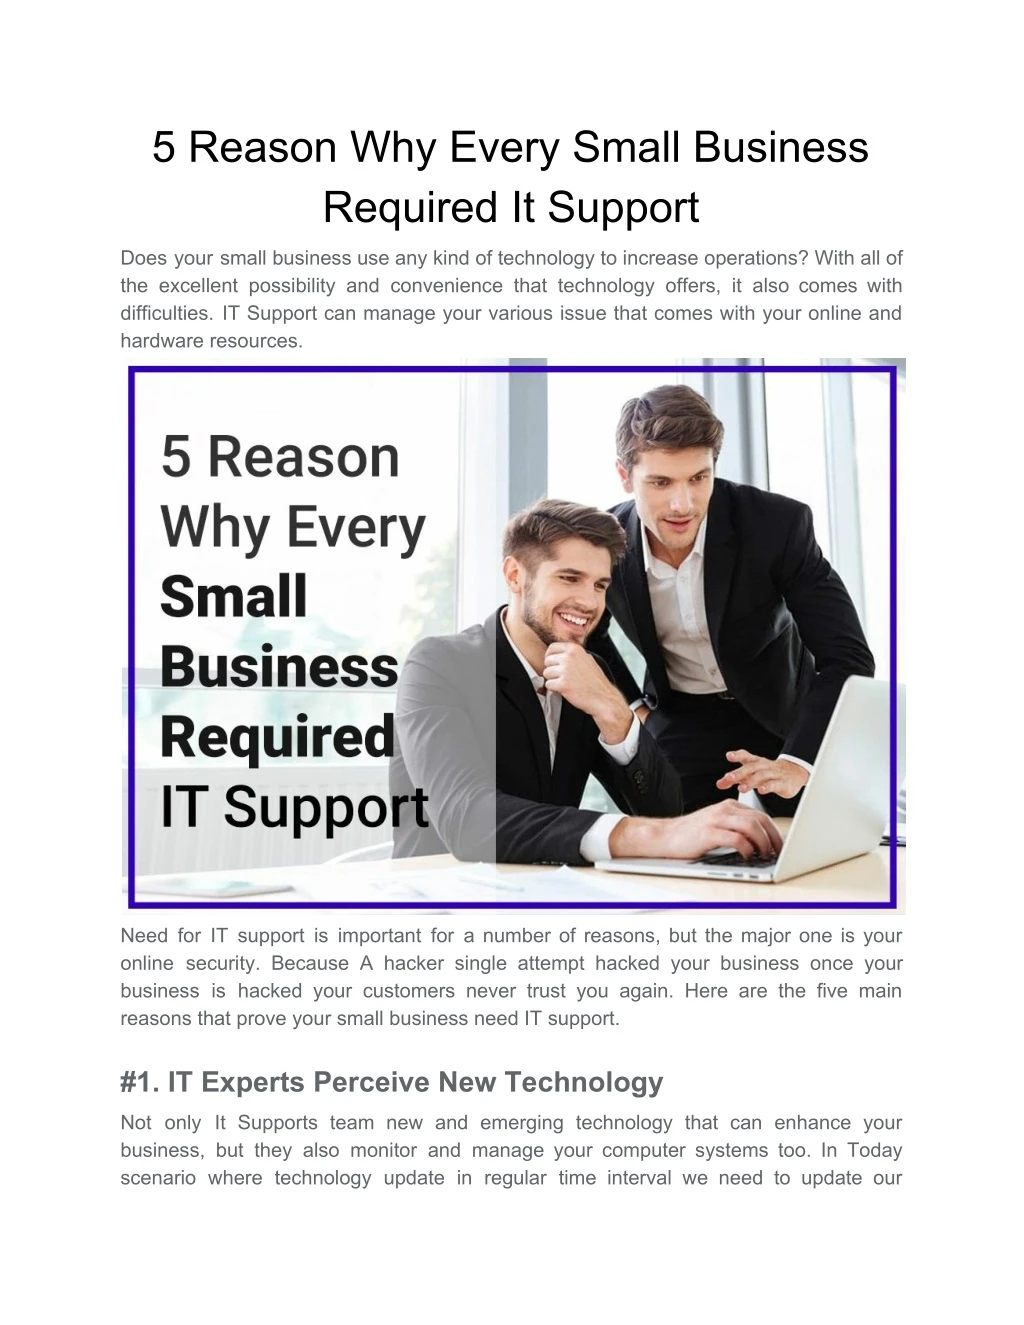 5 reason why every small business required